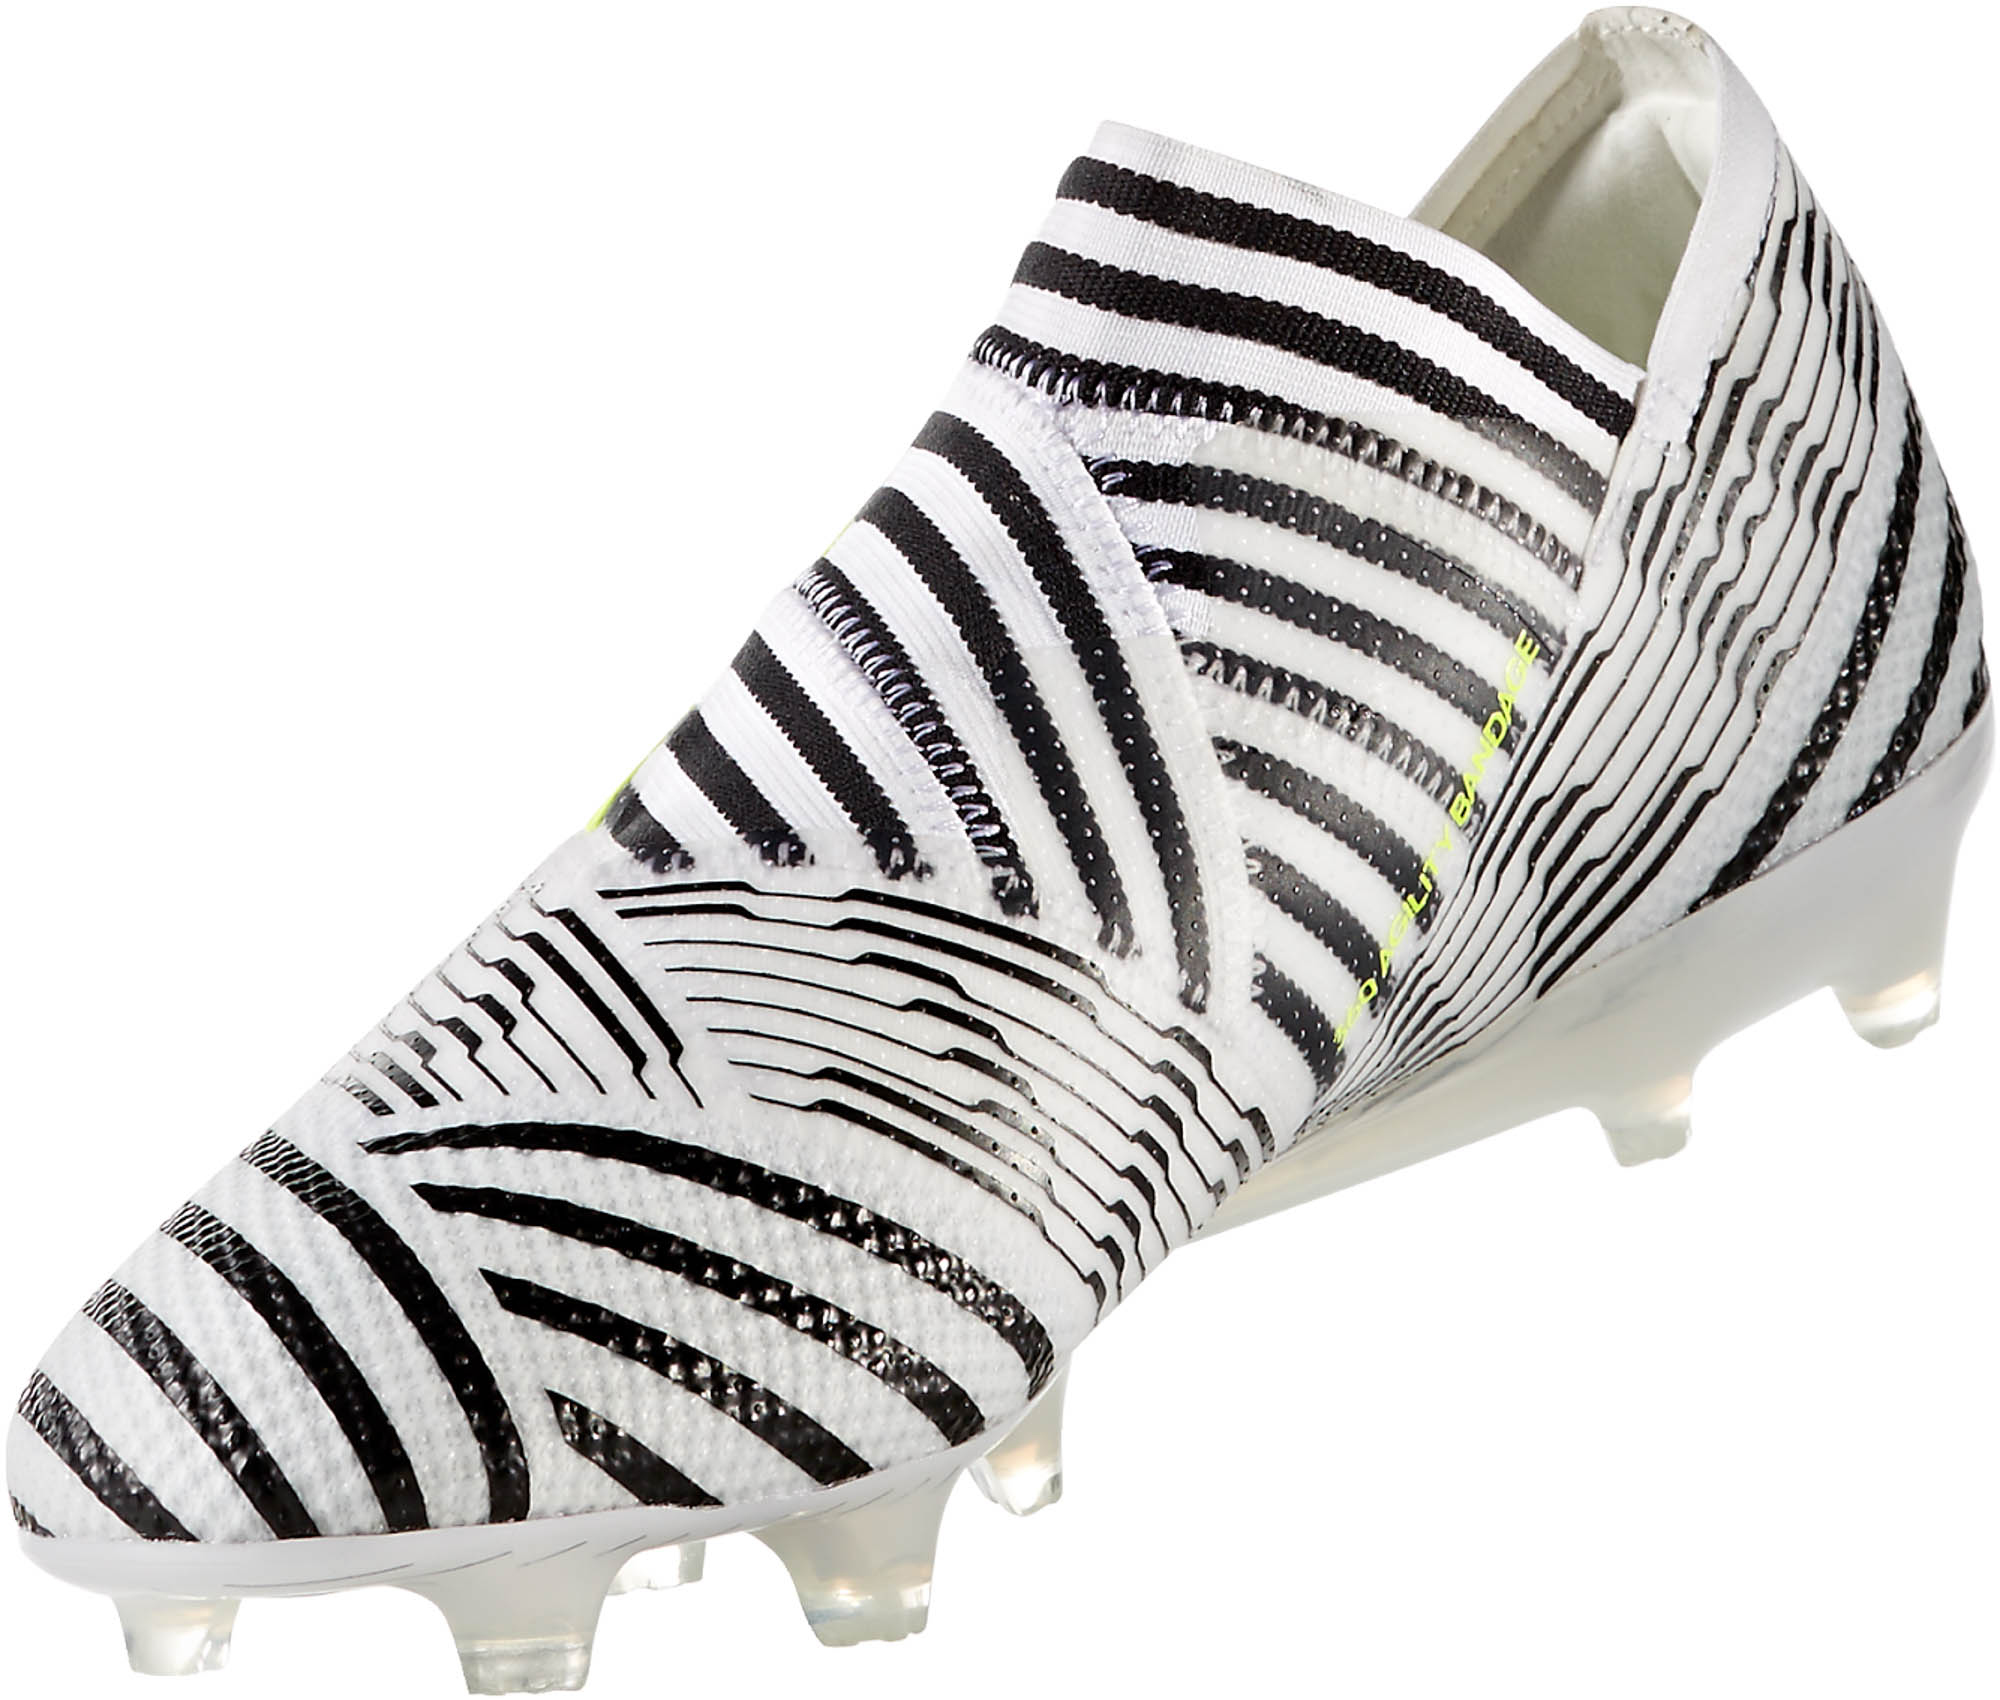 adidas cleats without laces